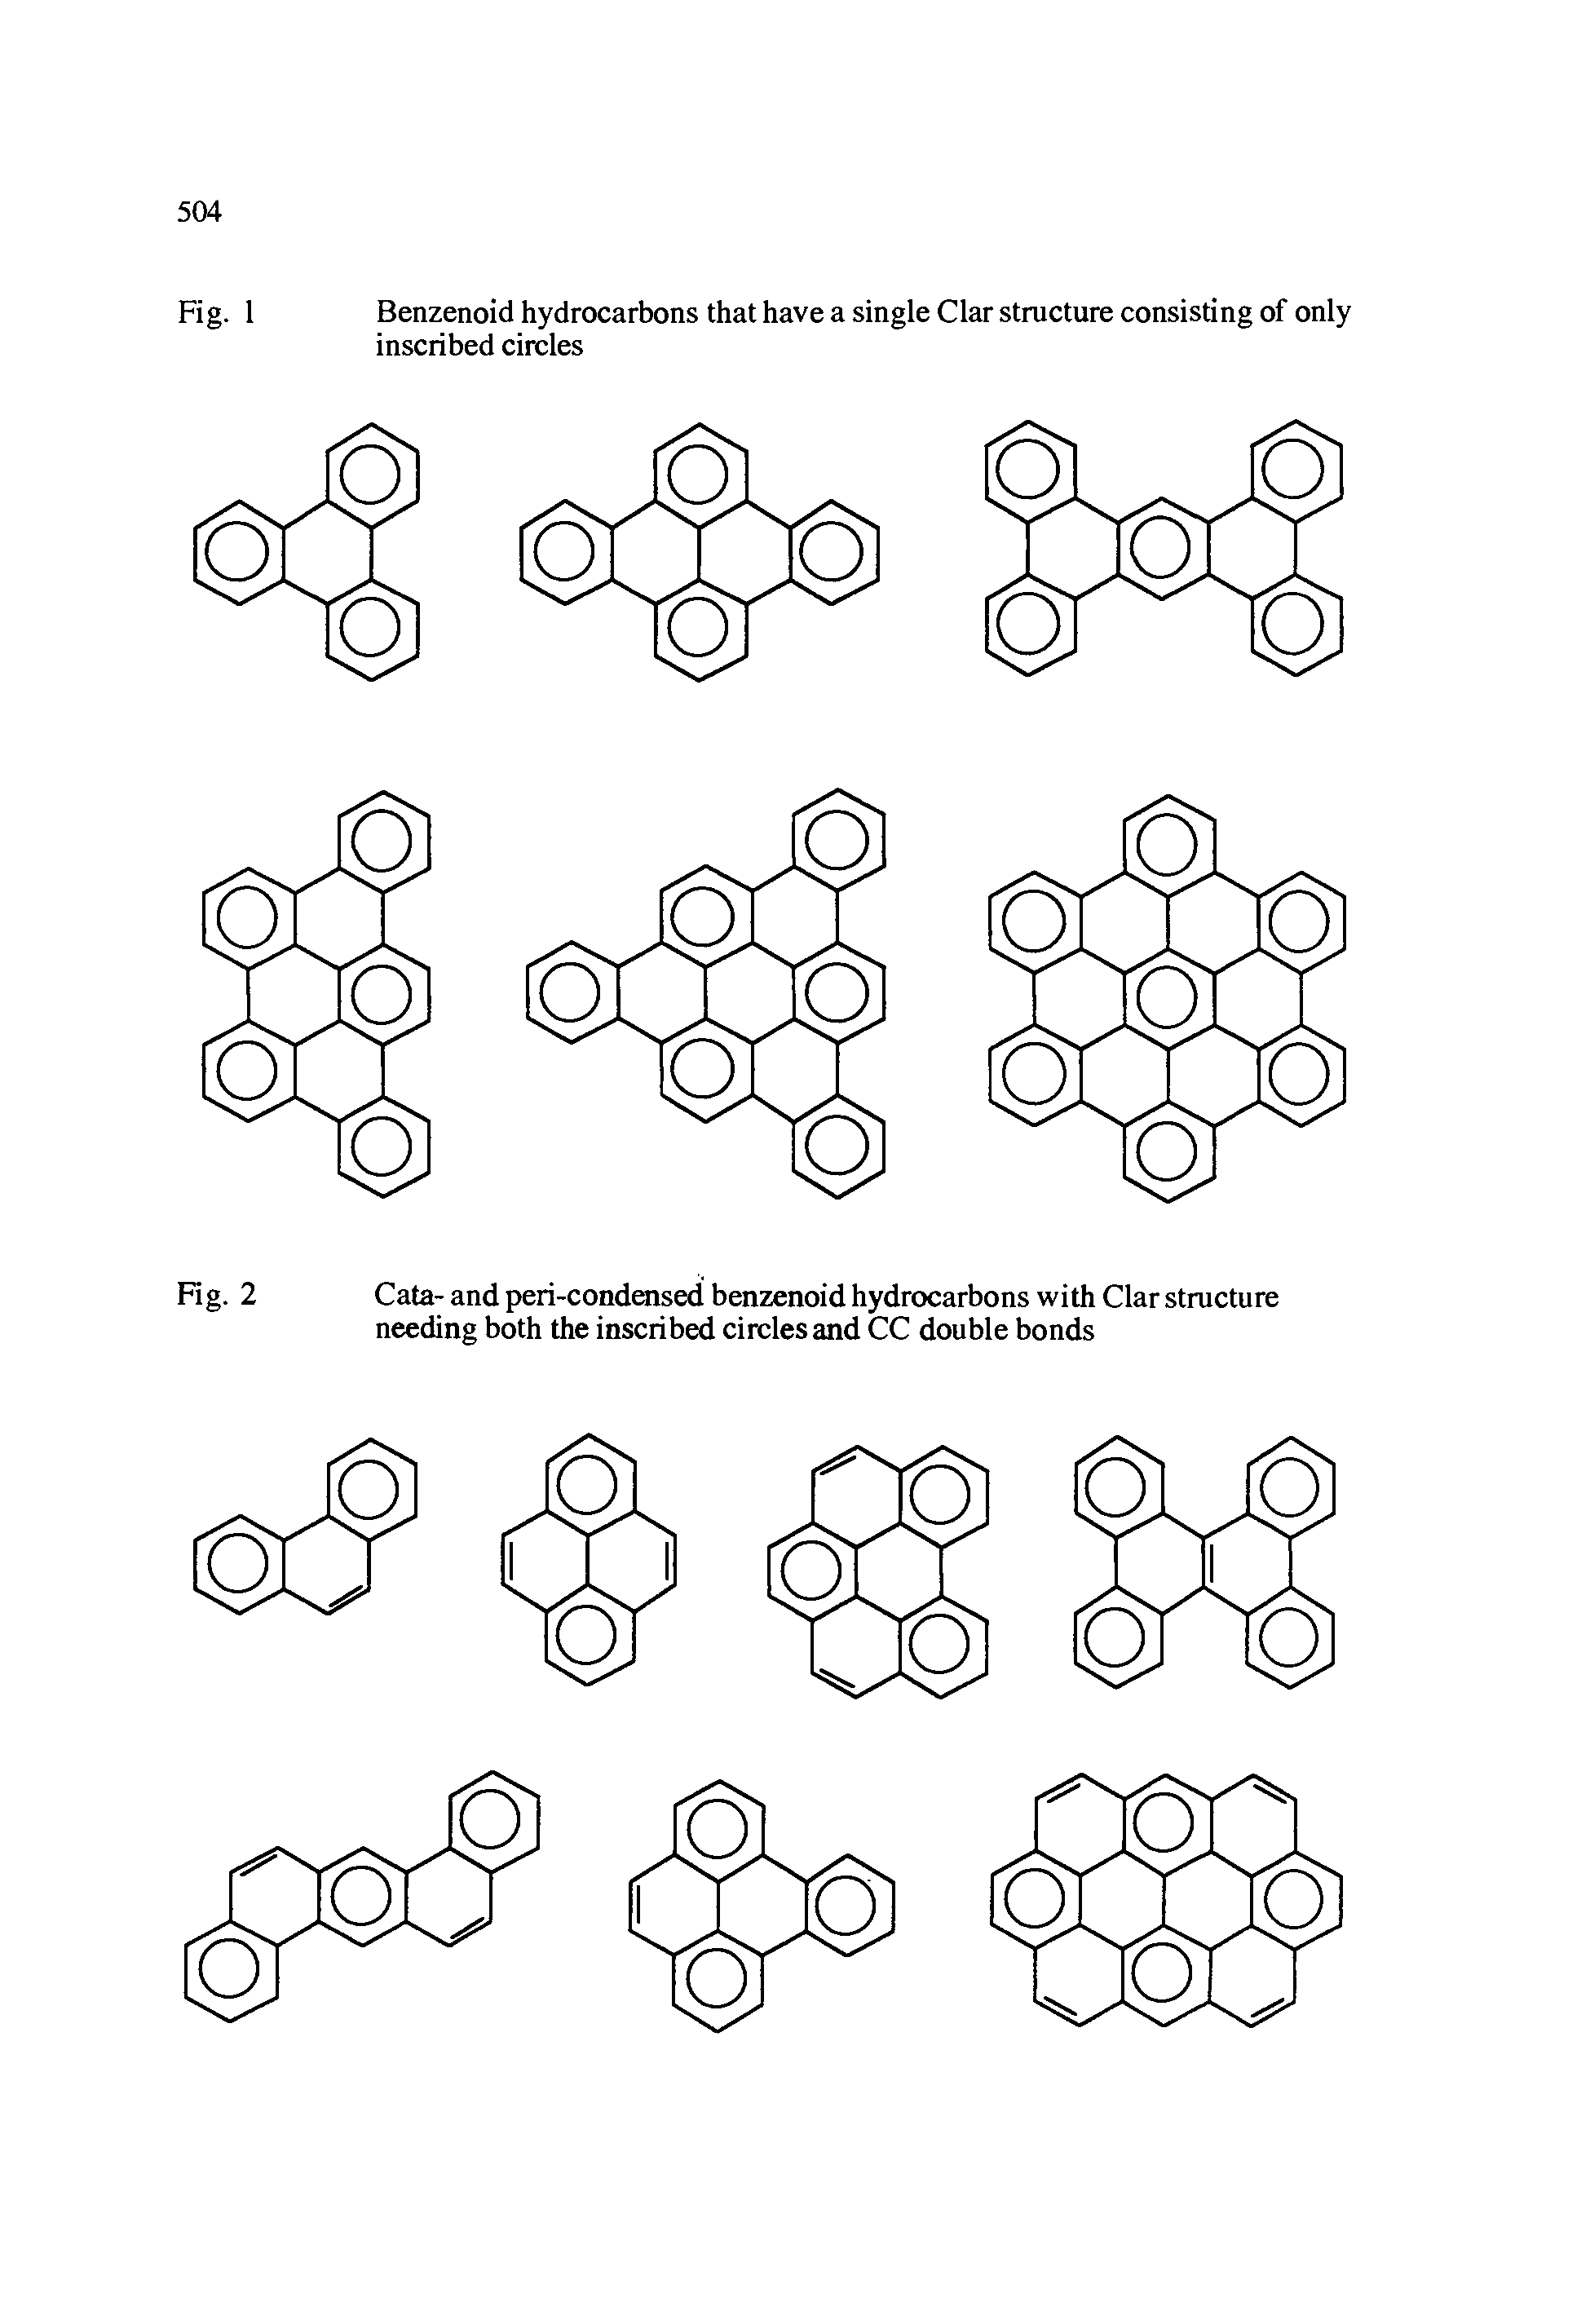 Fig. 2 Cata- and peri-condensed benzenoid hydrocarbons with Clar structure...